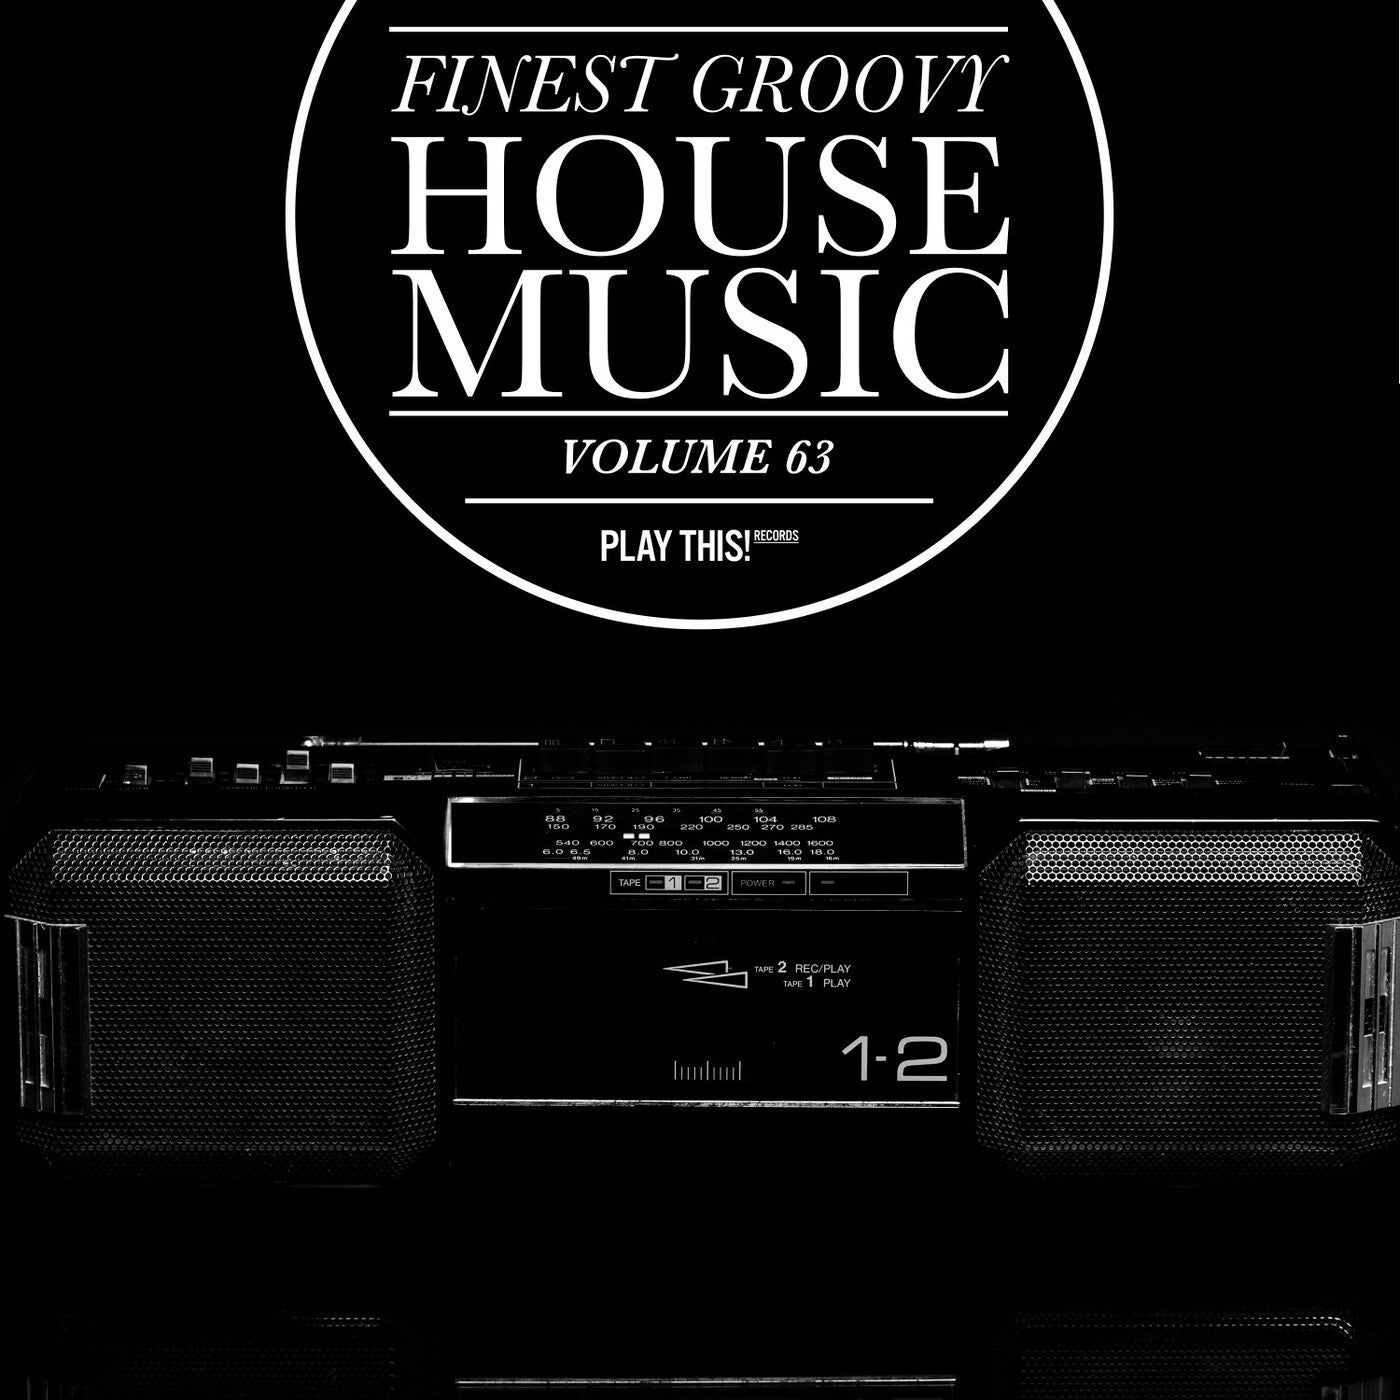 Finest Groovy House Music, Vol. 63